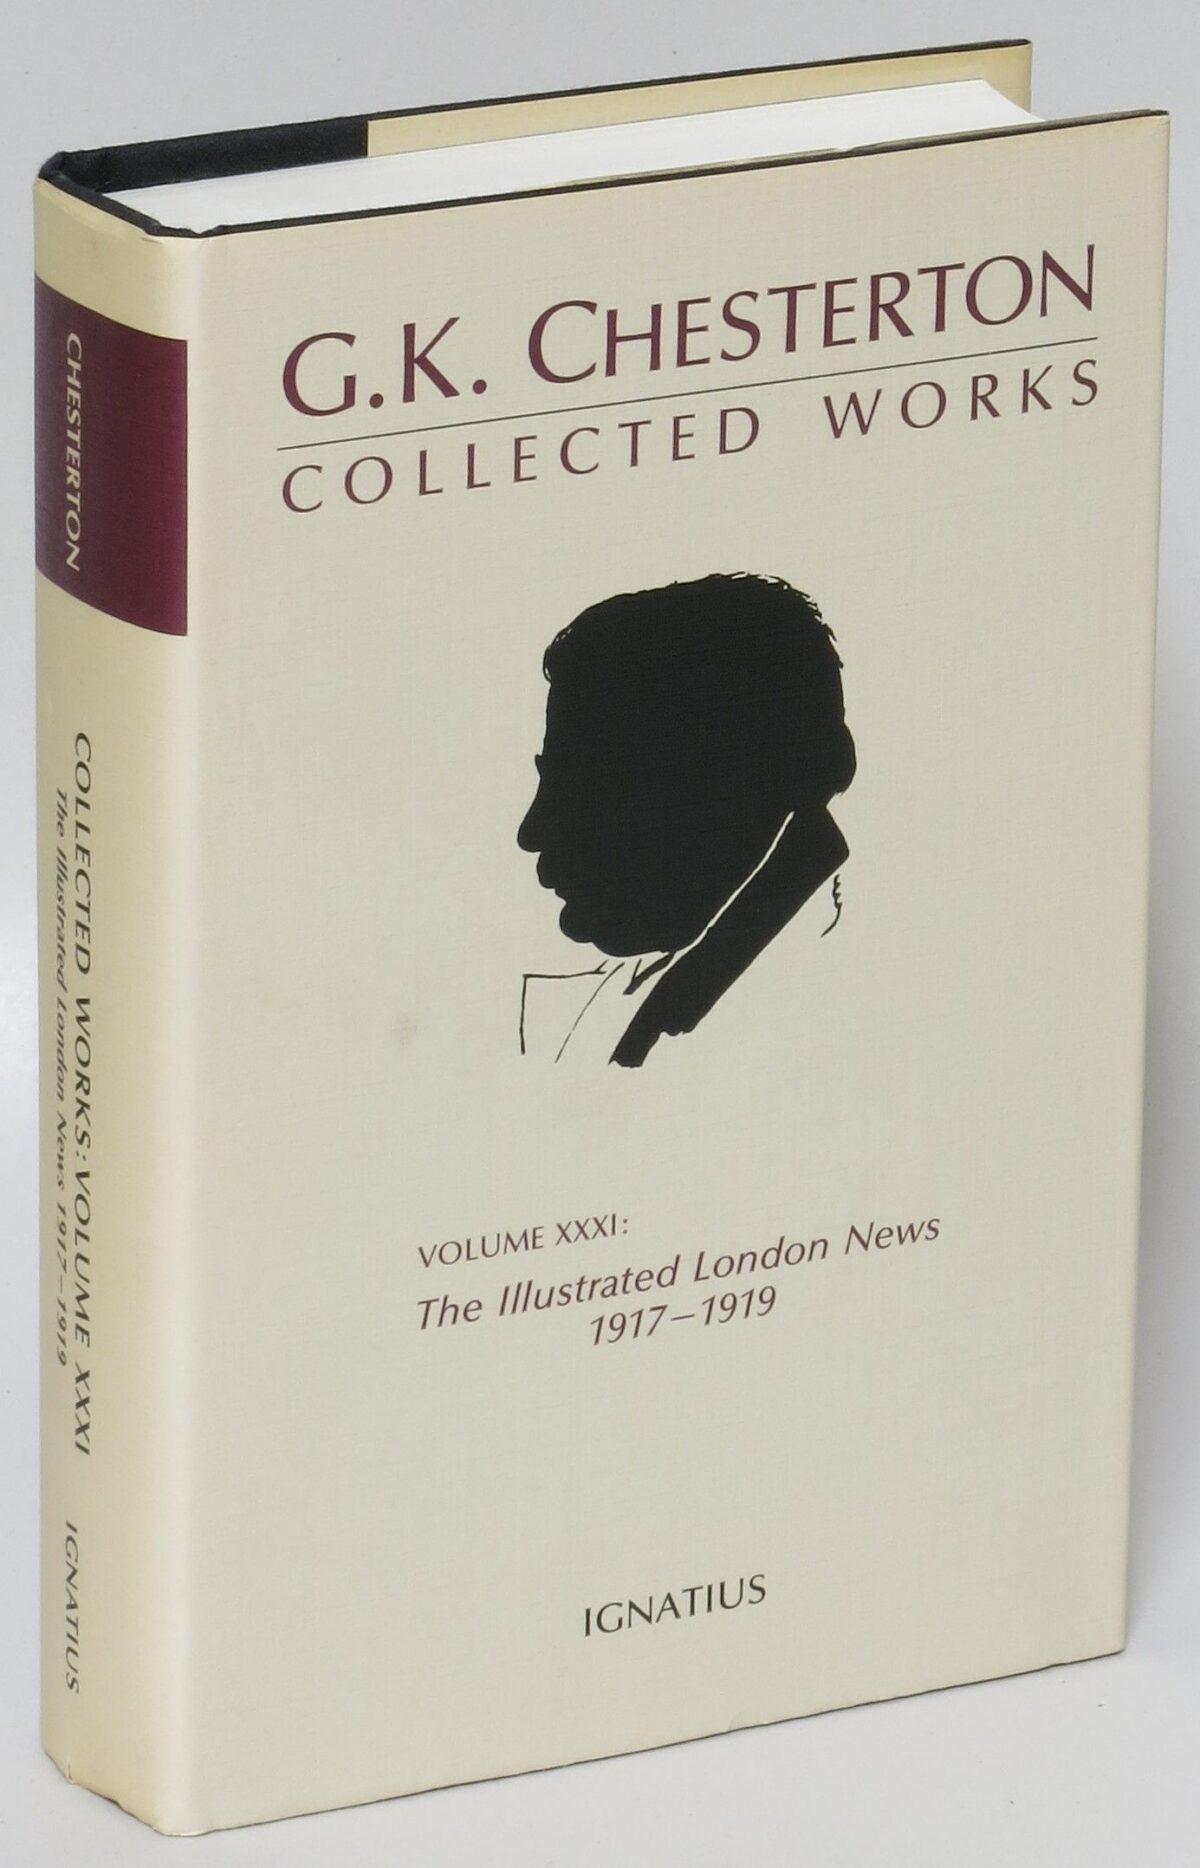 A volume of collected works by G.K. Chesterton put out by The Illustrated London News.